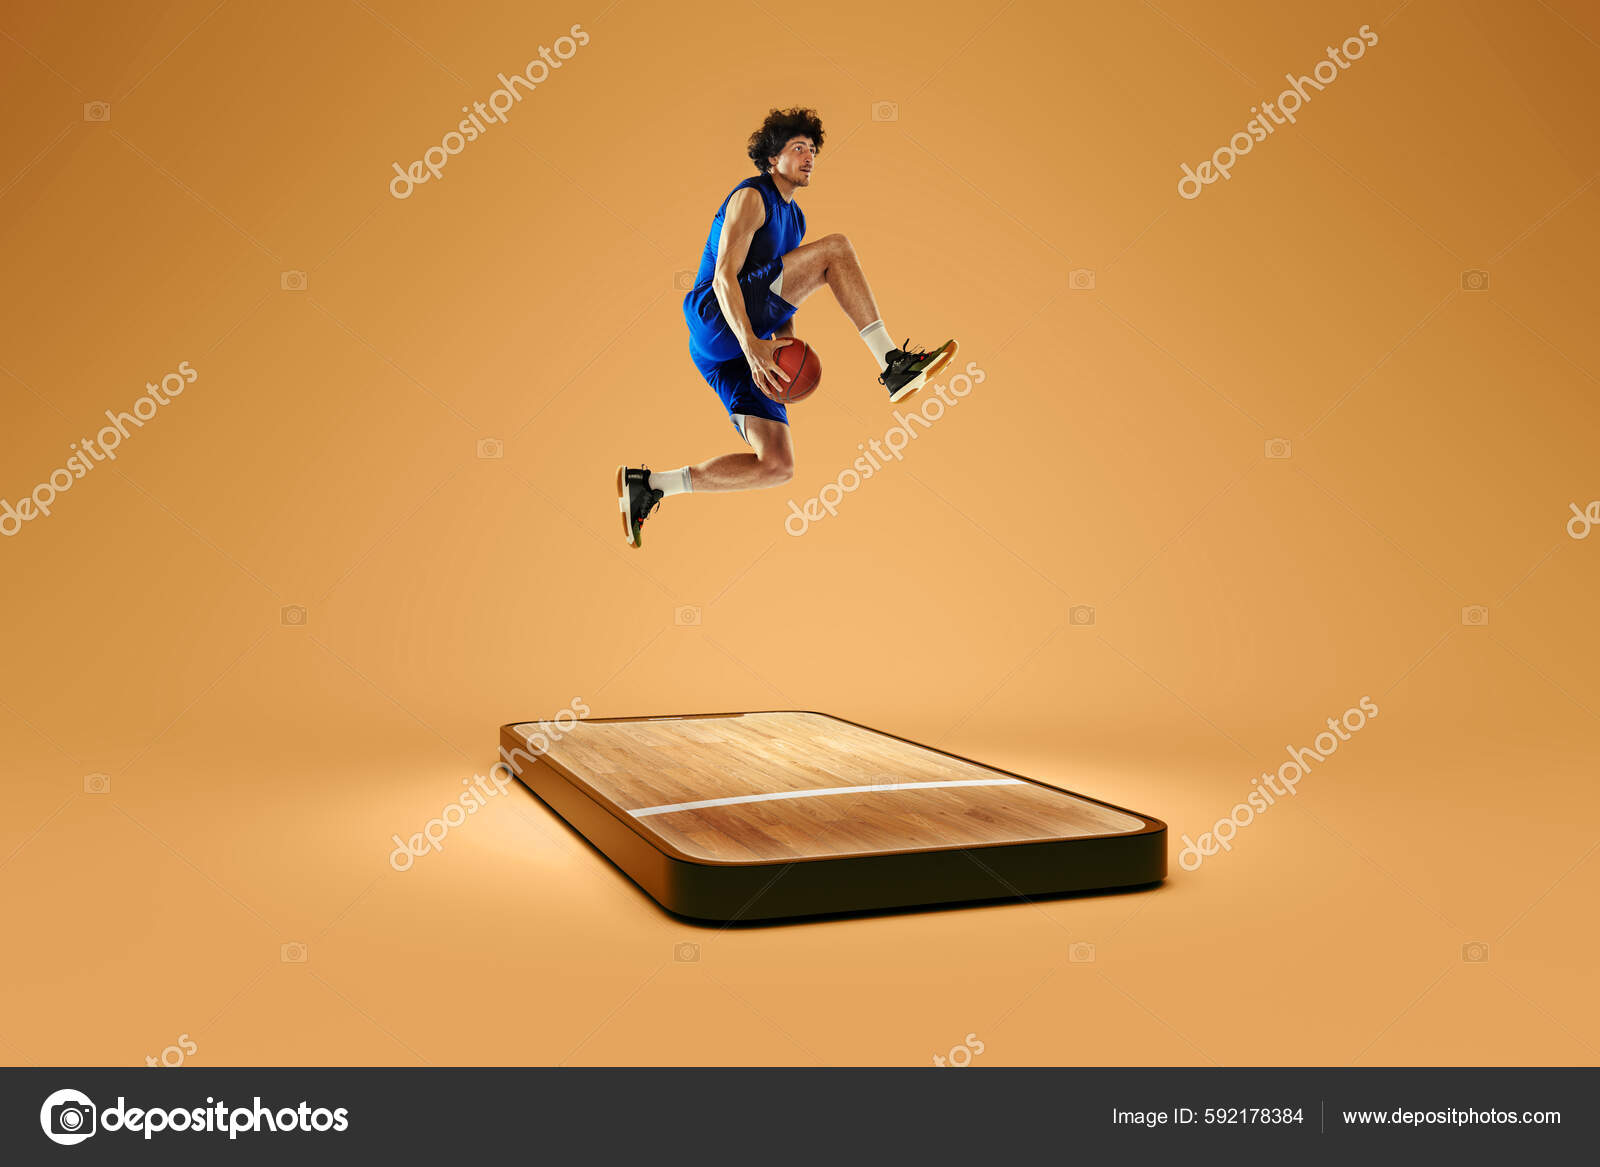 Online Broadcasts Sports Competitions Professional Basketball Player Playing Basketball Device Stock Photo by ©vova130555@gmail 592178384